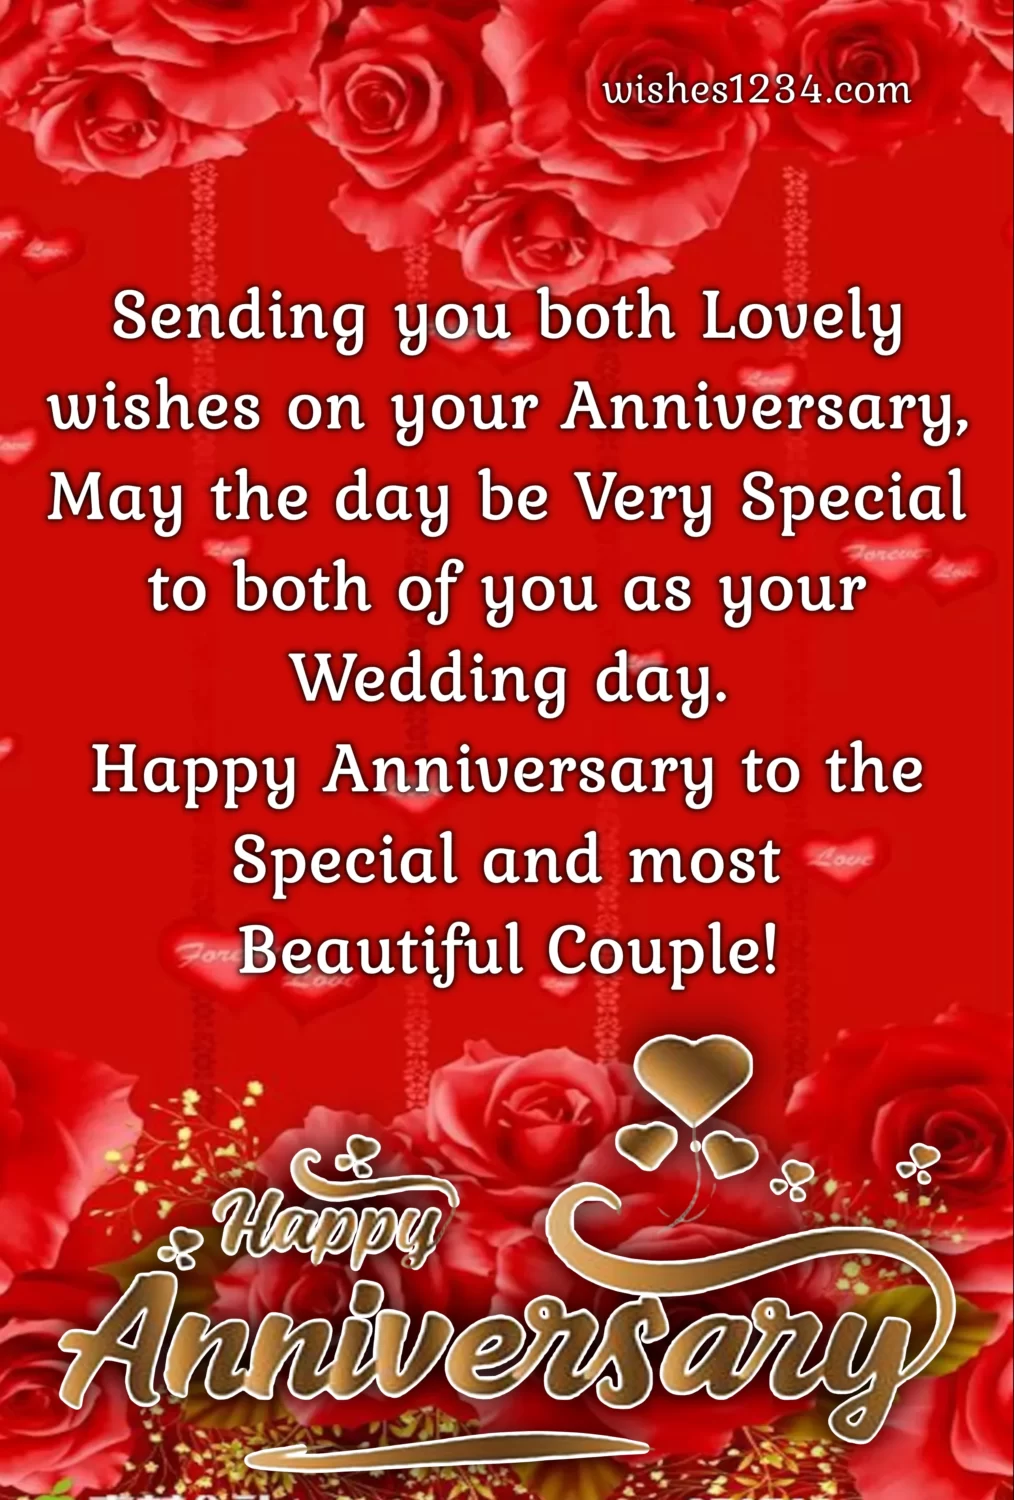 Wedding anniversary quote with red roses, Happy Anniversary.